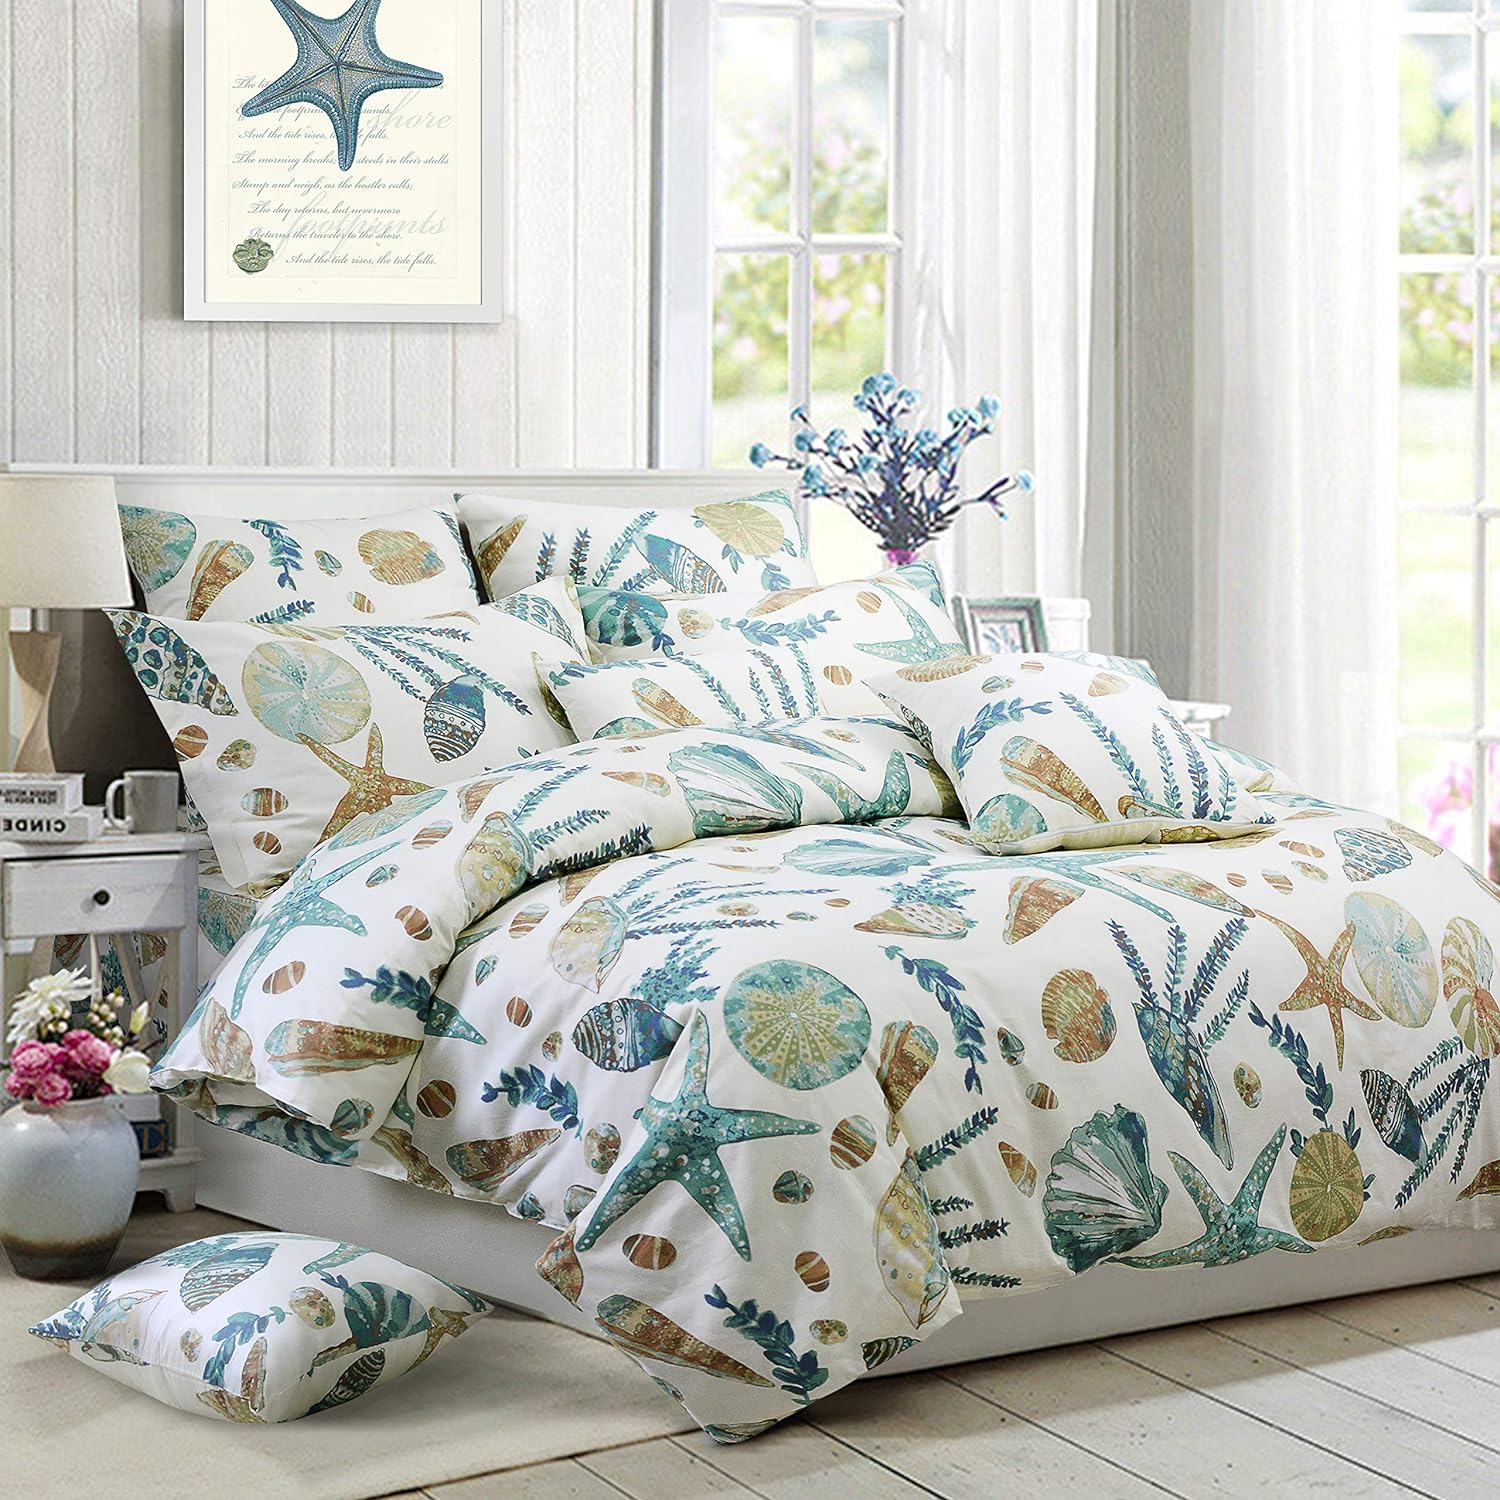 FADFAY Duvet Cover Set Twin Beach Themed Bedding Sets 100% Cotton Super Soft Coastal Bedding White Teal Seashells and Starfish Nautical Bedding with Hidden Zipper Closure 3 Pieces Twin Size